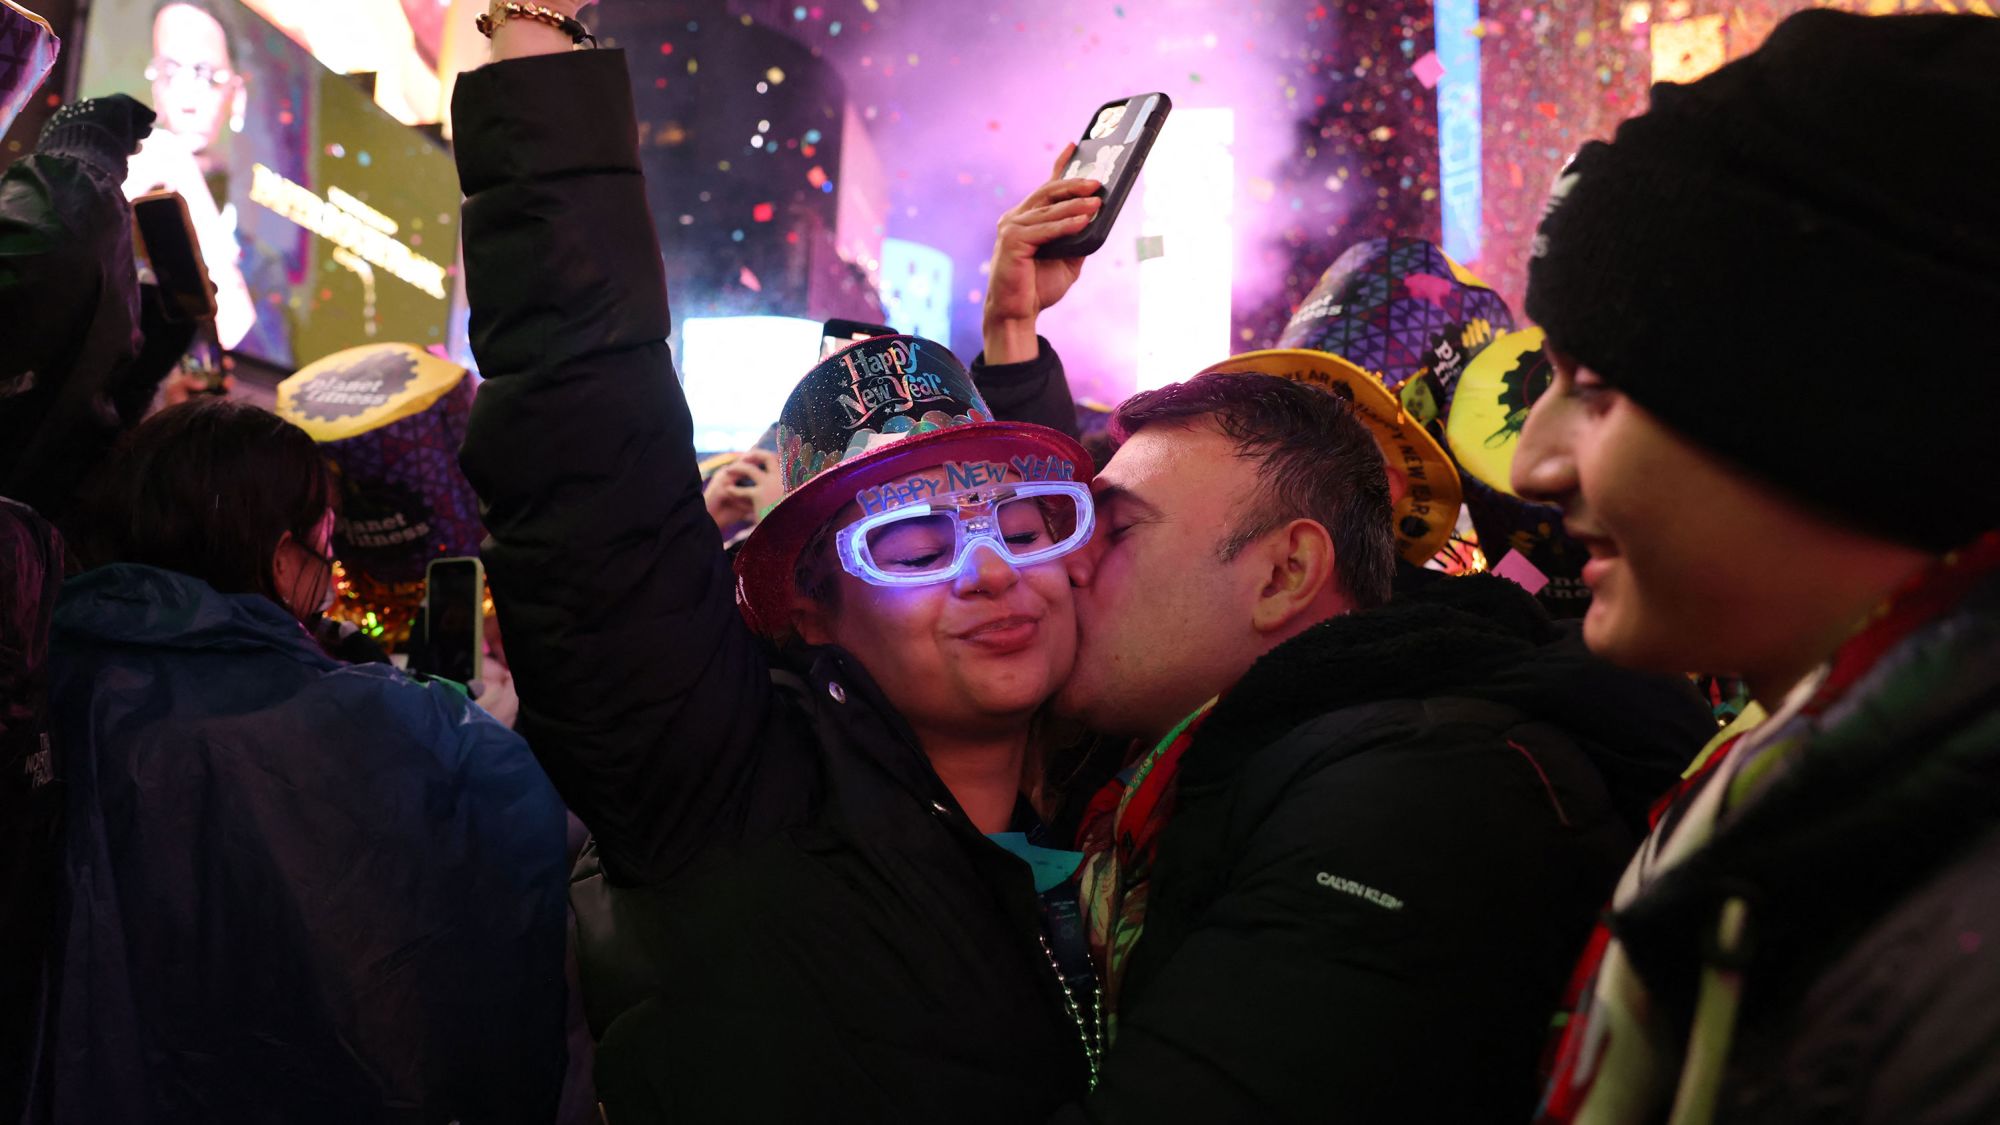 People kiss as confetti fills the air to mark the beginning of the new year, in Times Square, New York City, on January 1, 2023. (Photo by Yuki IWAMURA / AFP) (Photo by YUKI IWAMURA/AFP via Getty Images)